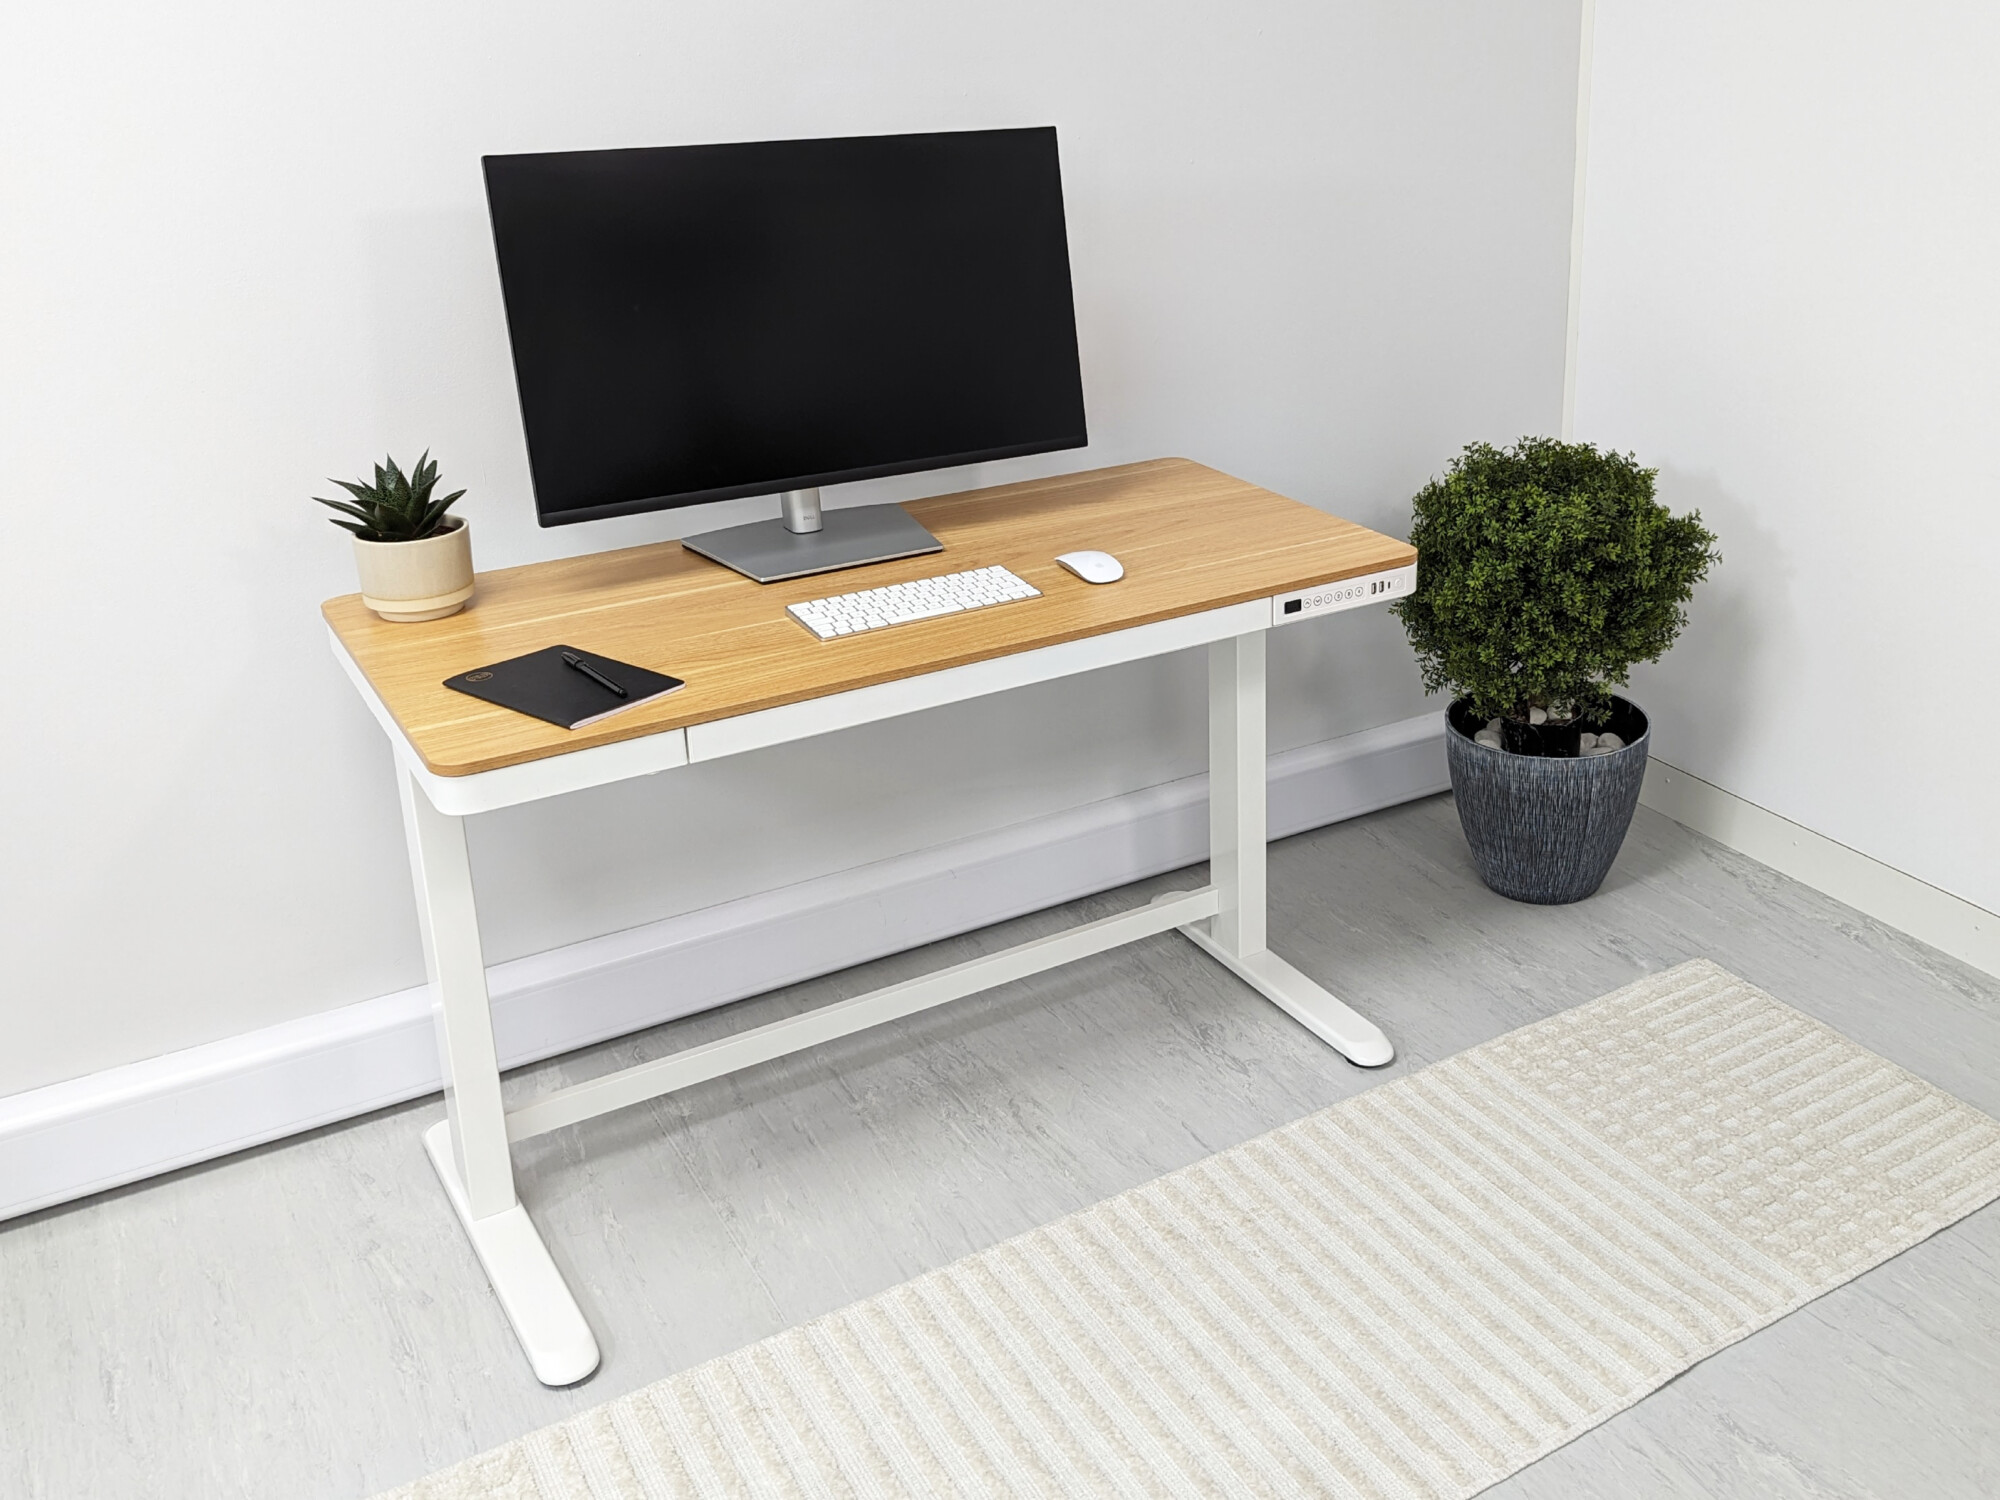 The Saturn Height Adjustable Desk offers a Scandinavian aesthetic blending maple wood and classic white to bring a sense of elegance to any home office. 